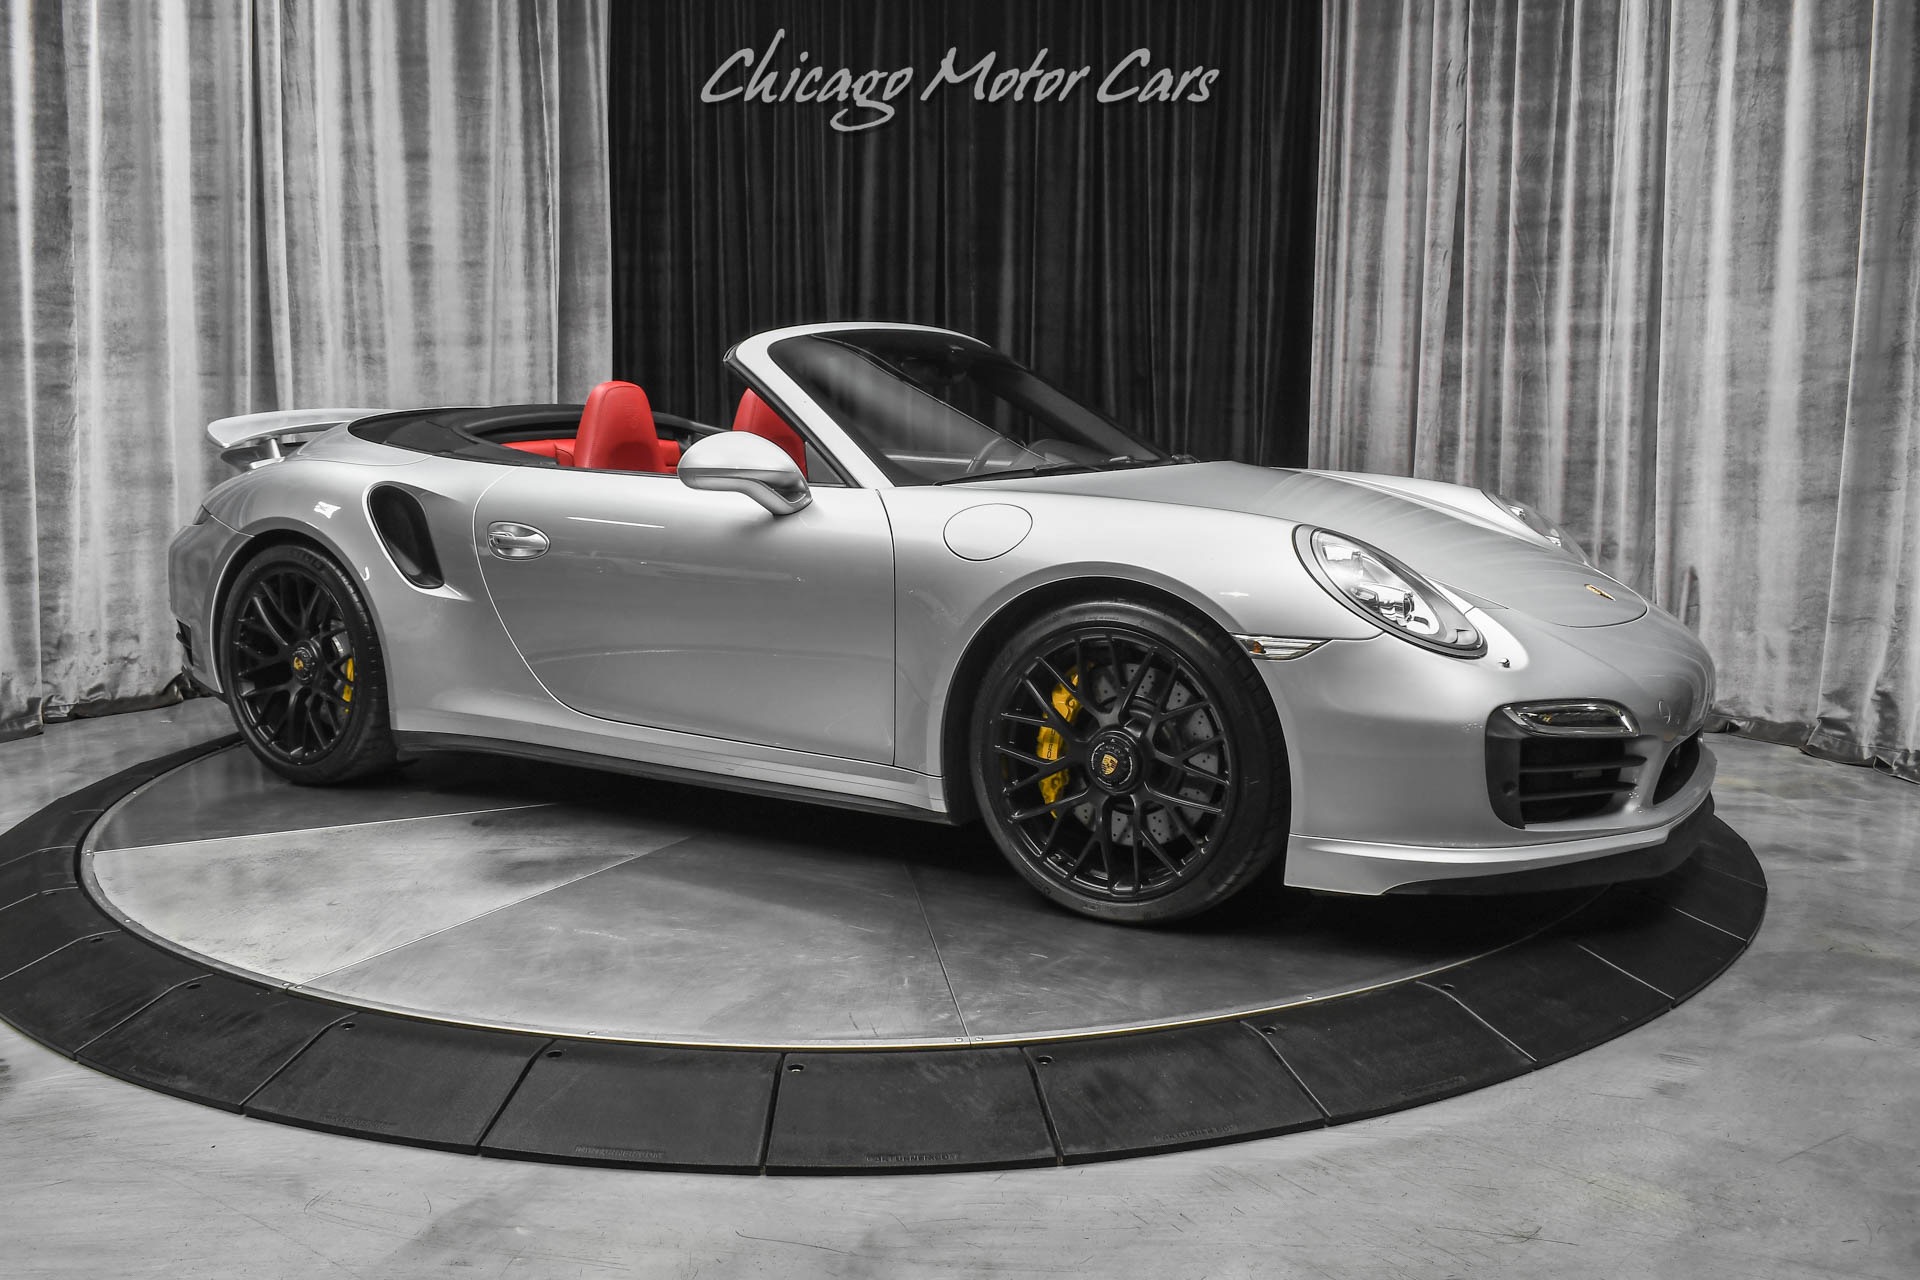 Used-2014-Porsche-911-Turbo-S-Convertible-LOW-Miles-Porsche-Entry---Drive-LOADED